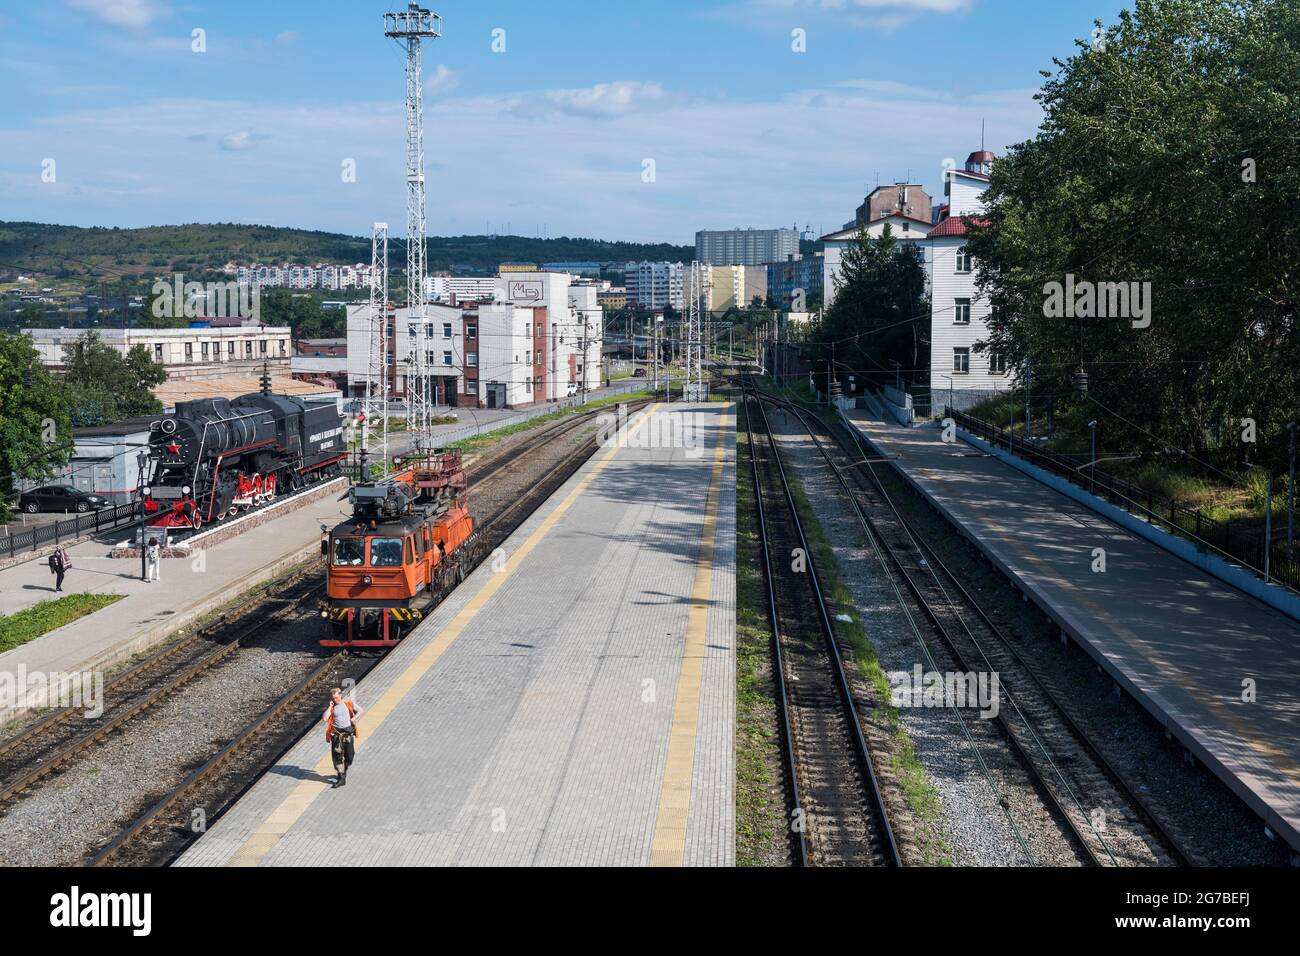 Overlook over the Railway station in Murmansk, Russia Stock Photo